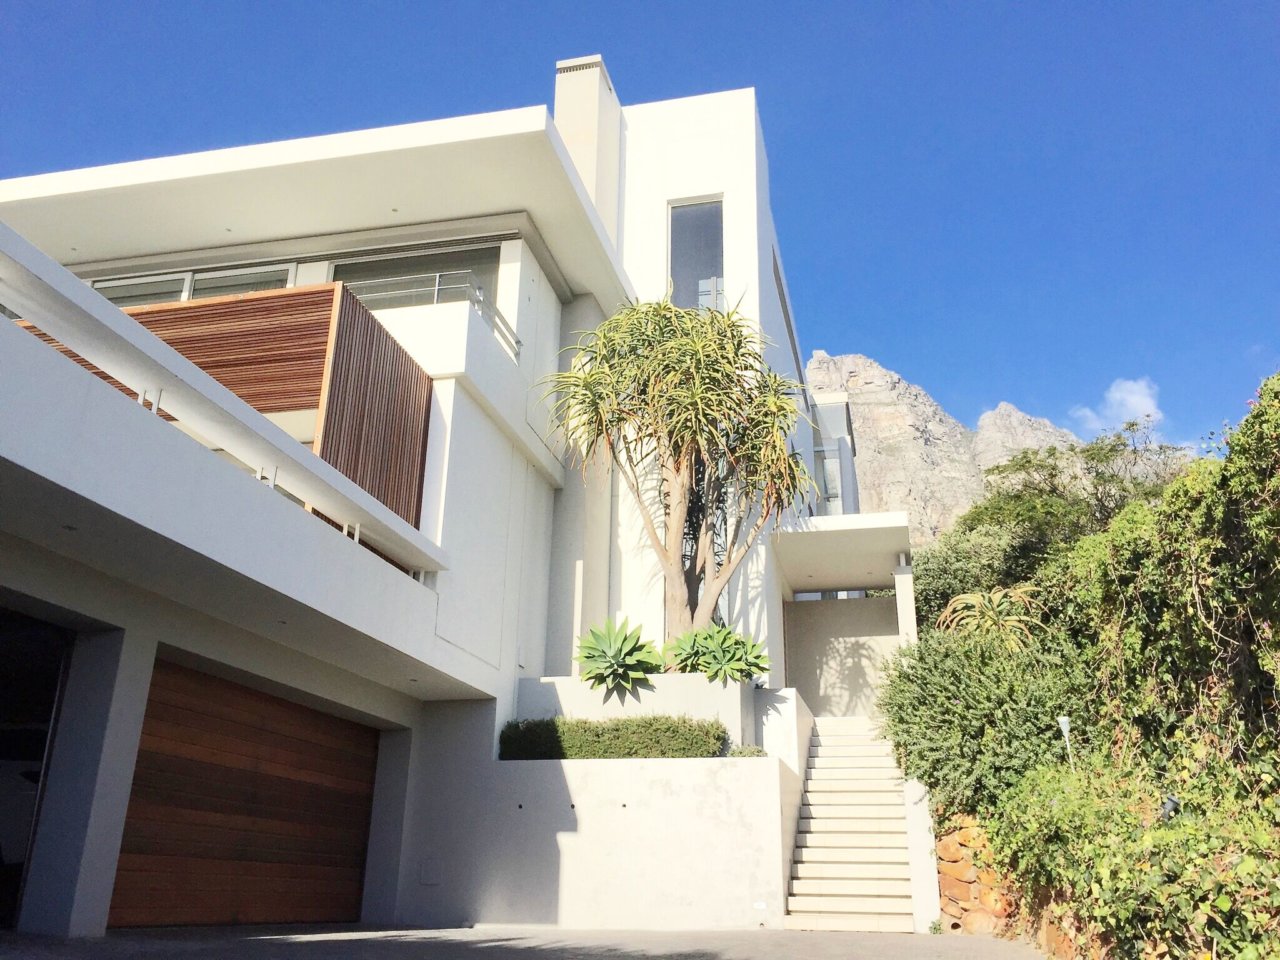 Photo 18 of Aqua Penthouse accommodation in Camps Bay, Cape Town with 2 bedrooms and 2 bathrooms